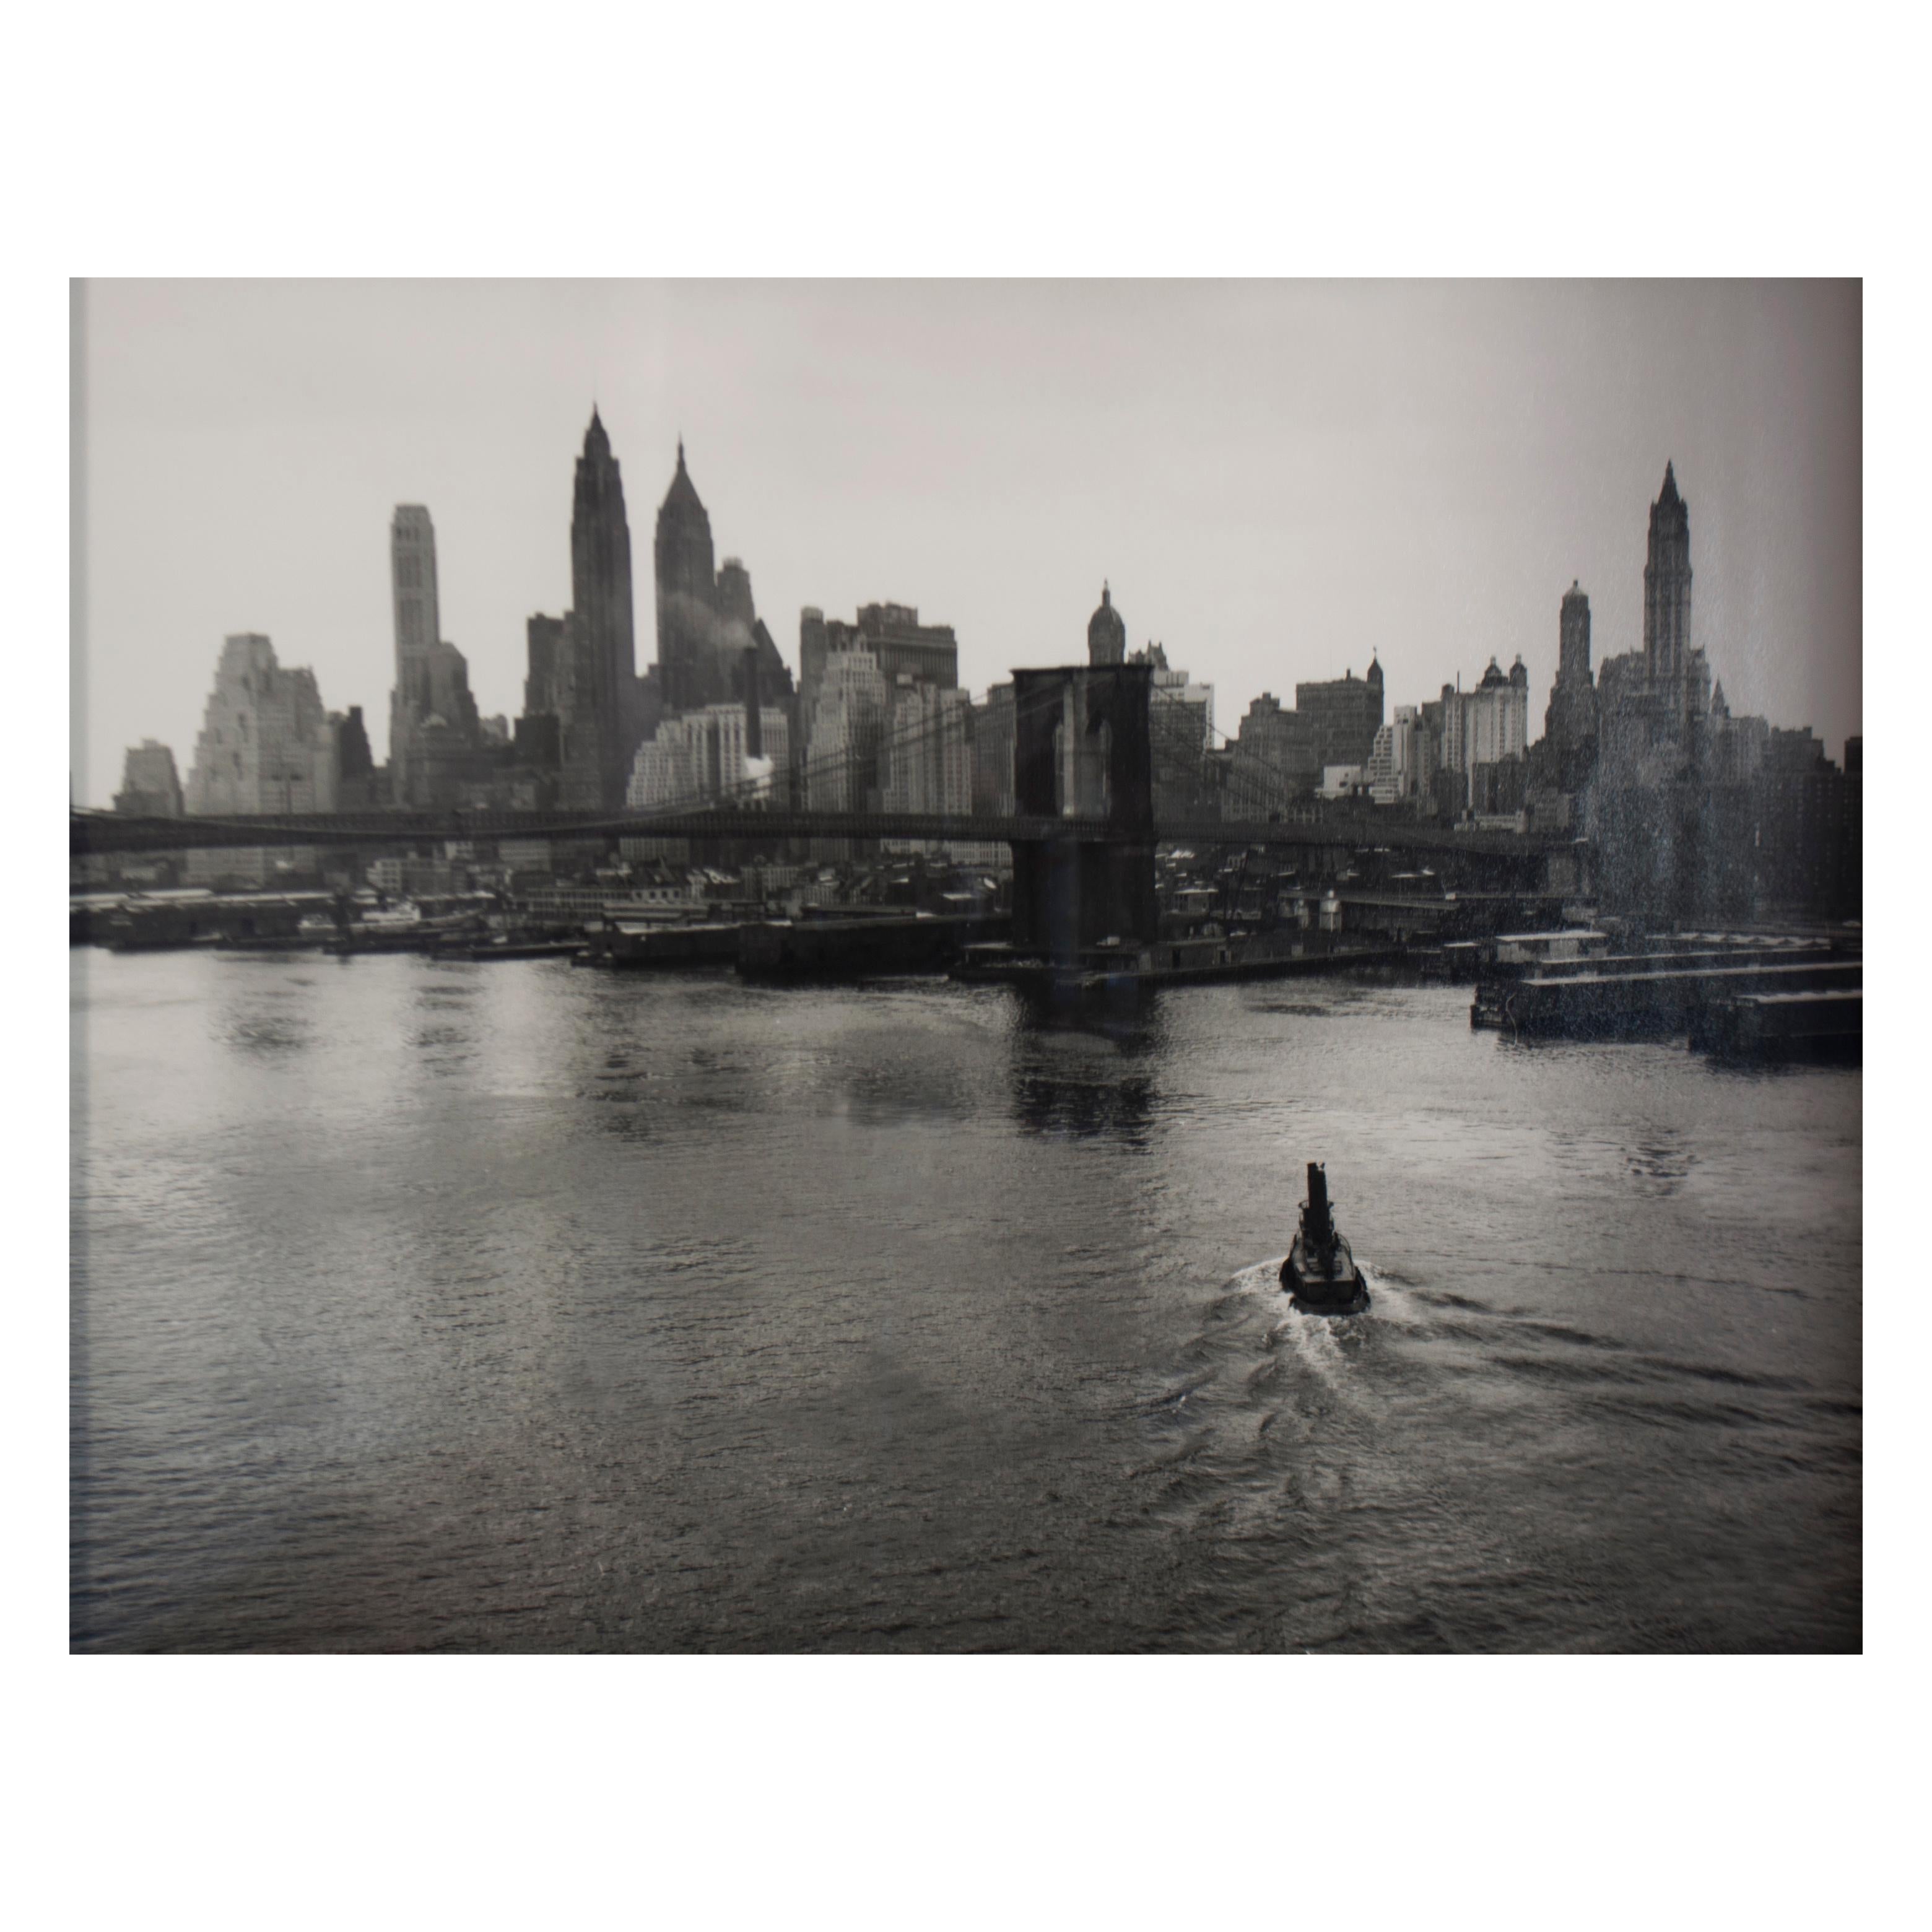 This vintage black and white photograph of Manhattan with bridge and river measures 12.5" x 15.5". The water is in the foreground and covers over half of the composition from the bottom of the print and is mostly calm, with small ripples visible. A